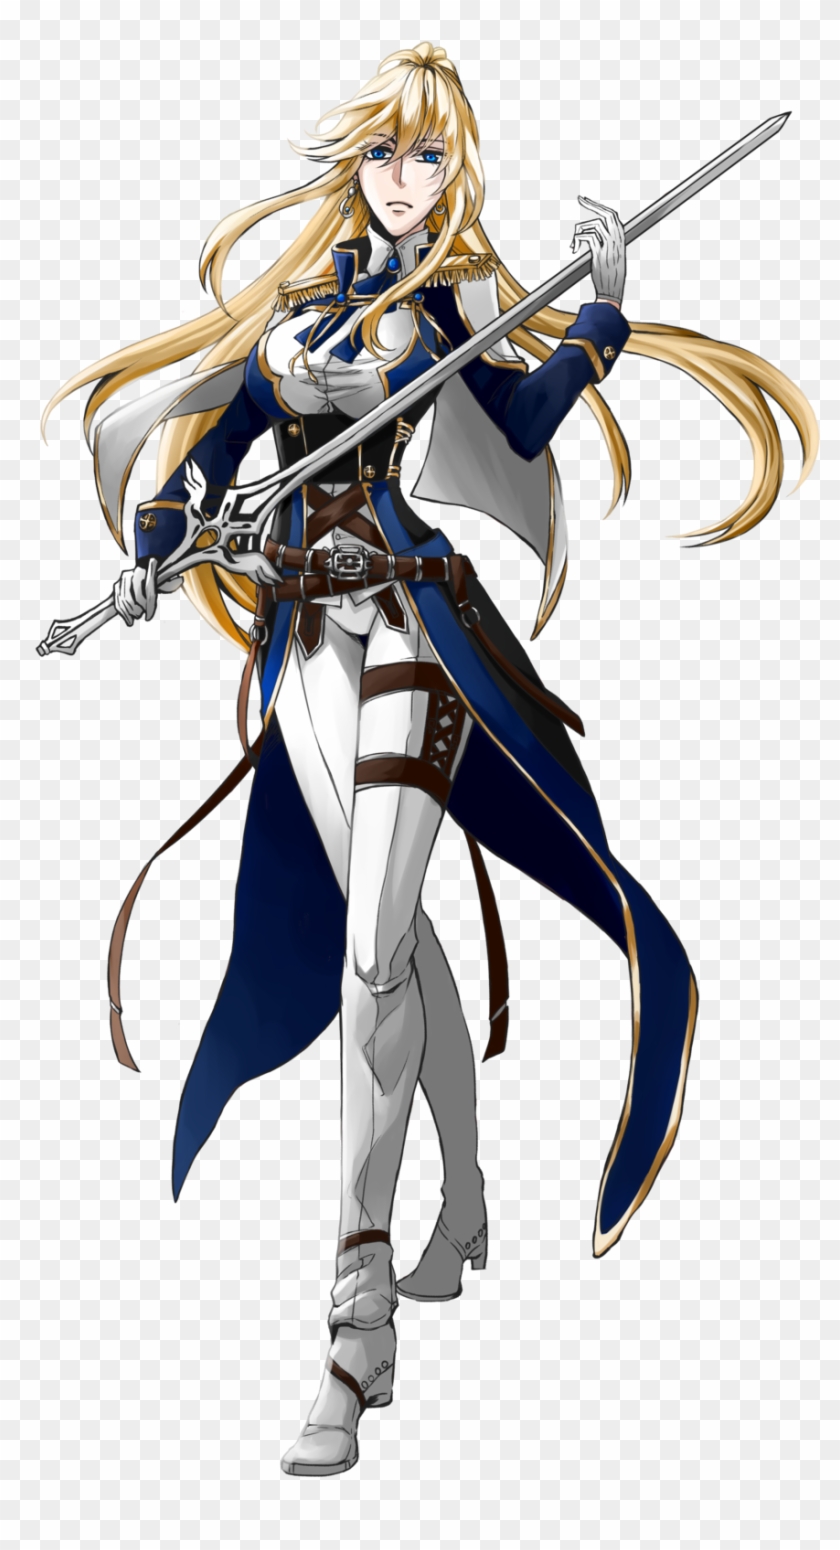 Have The Sword And Everything))07 - Anime Female Knight #1224745